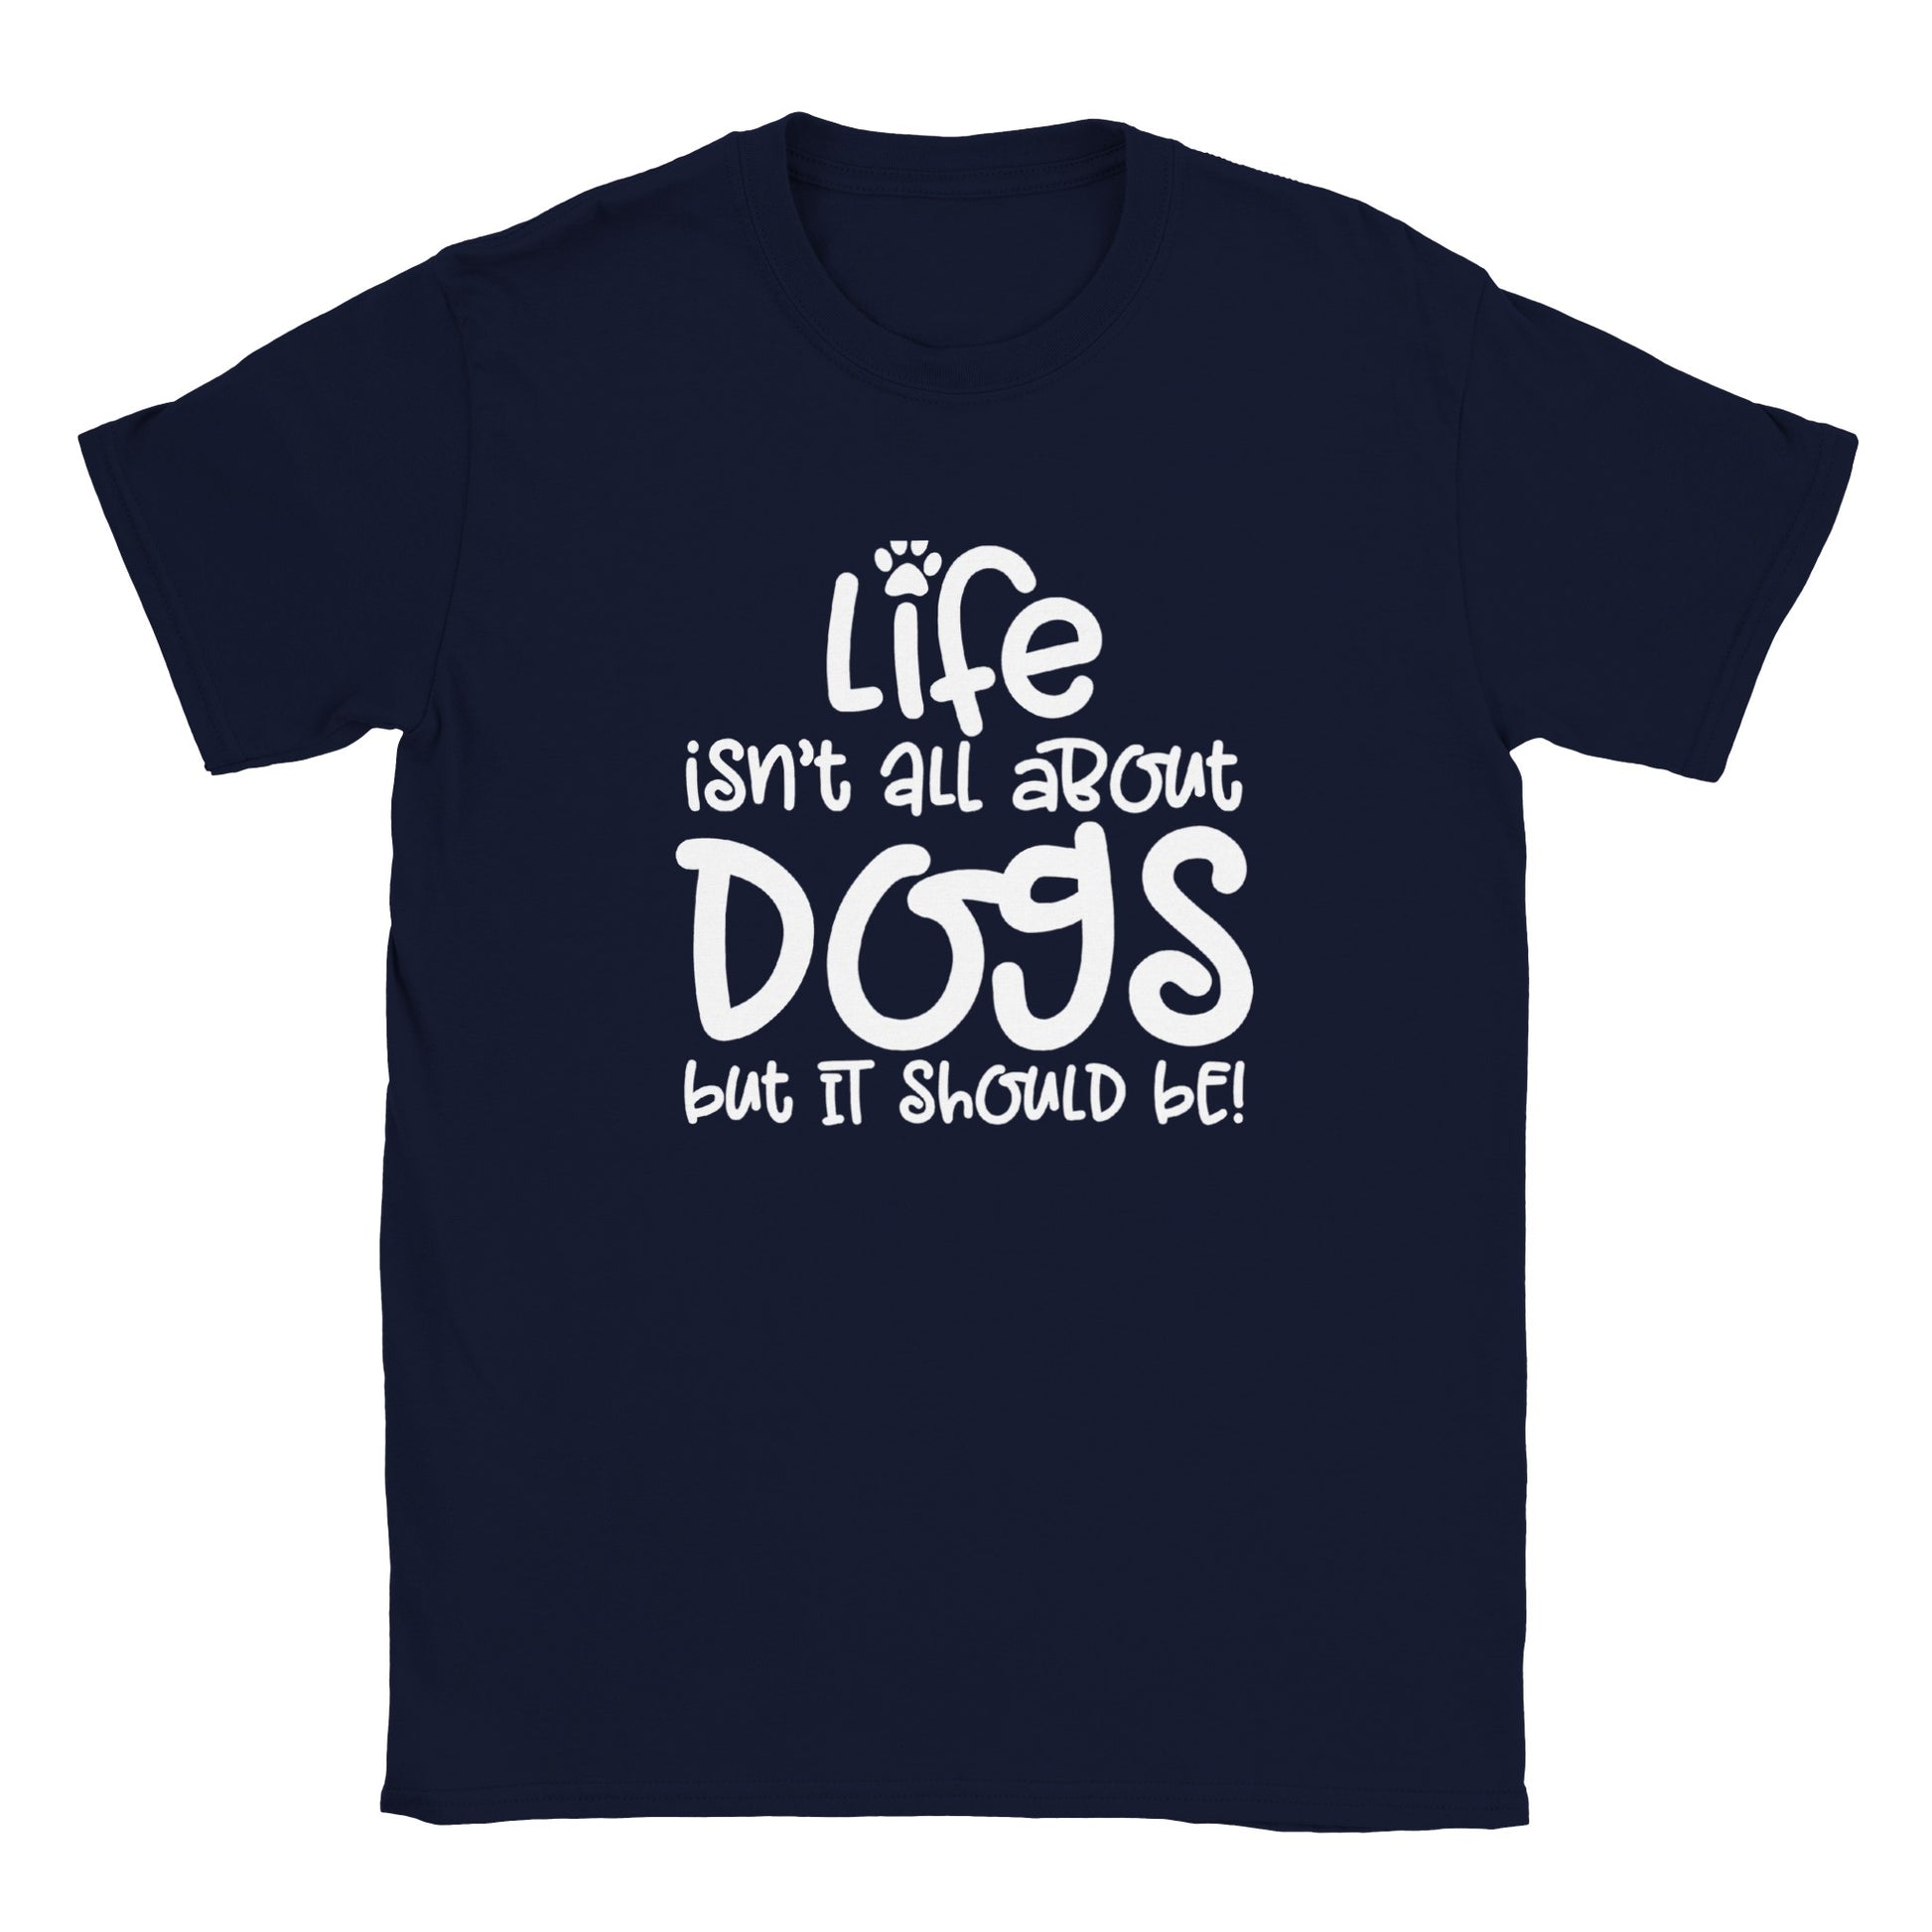 Life Isn't All About Dogs - Classic Unisex Crewneck T-shirt - Mister Snarky's